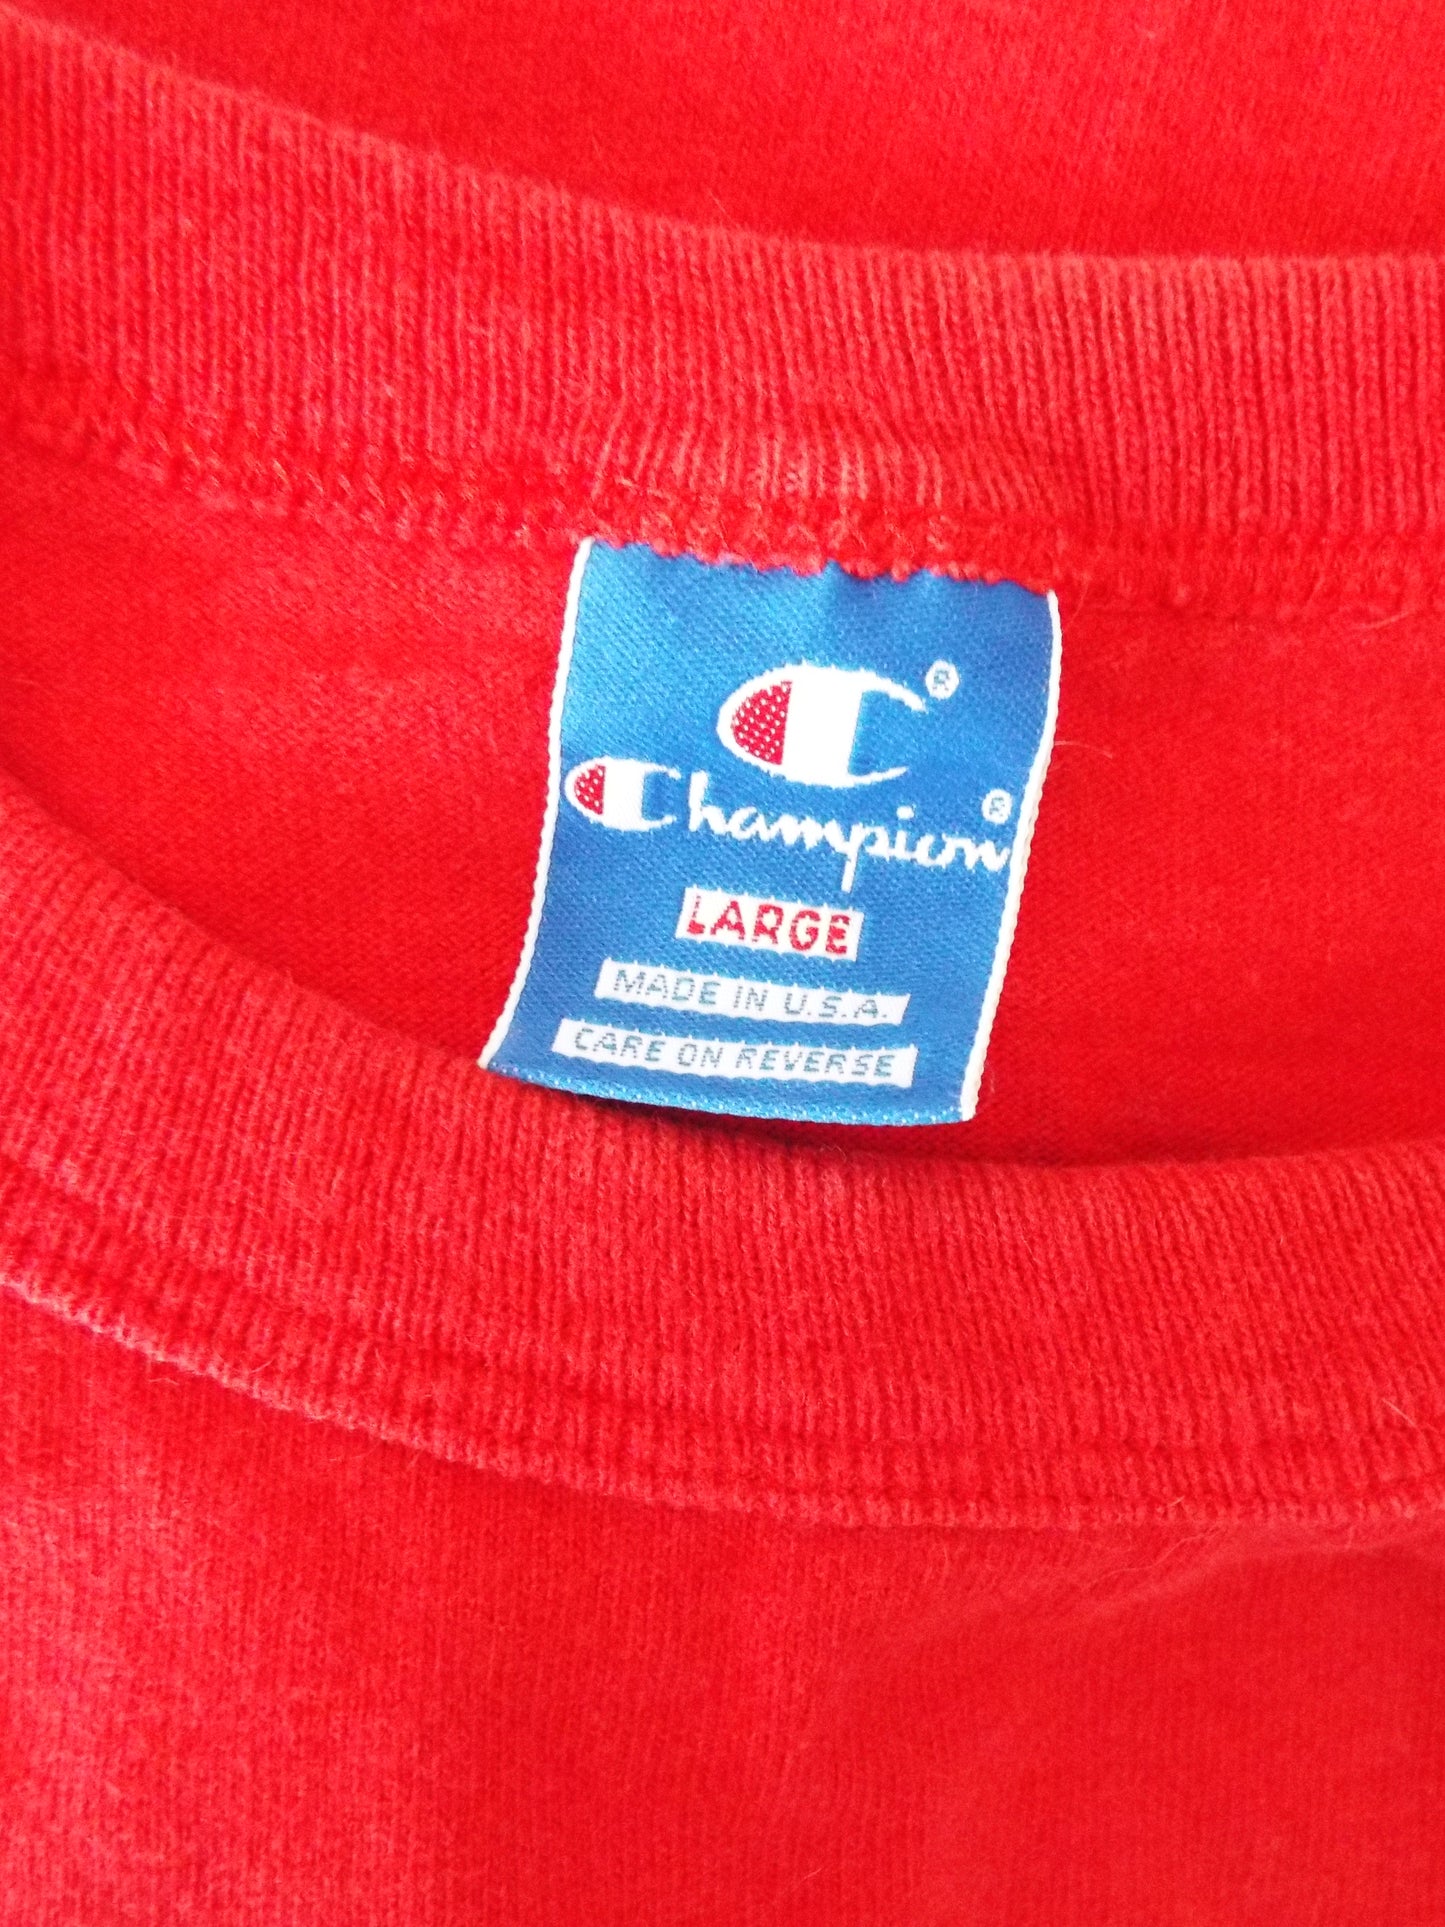 Vintage York College T Shirt by Champion